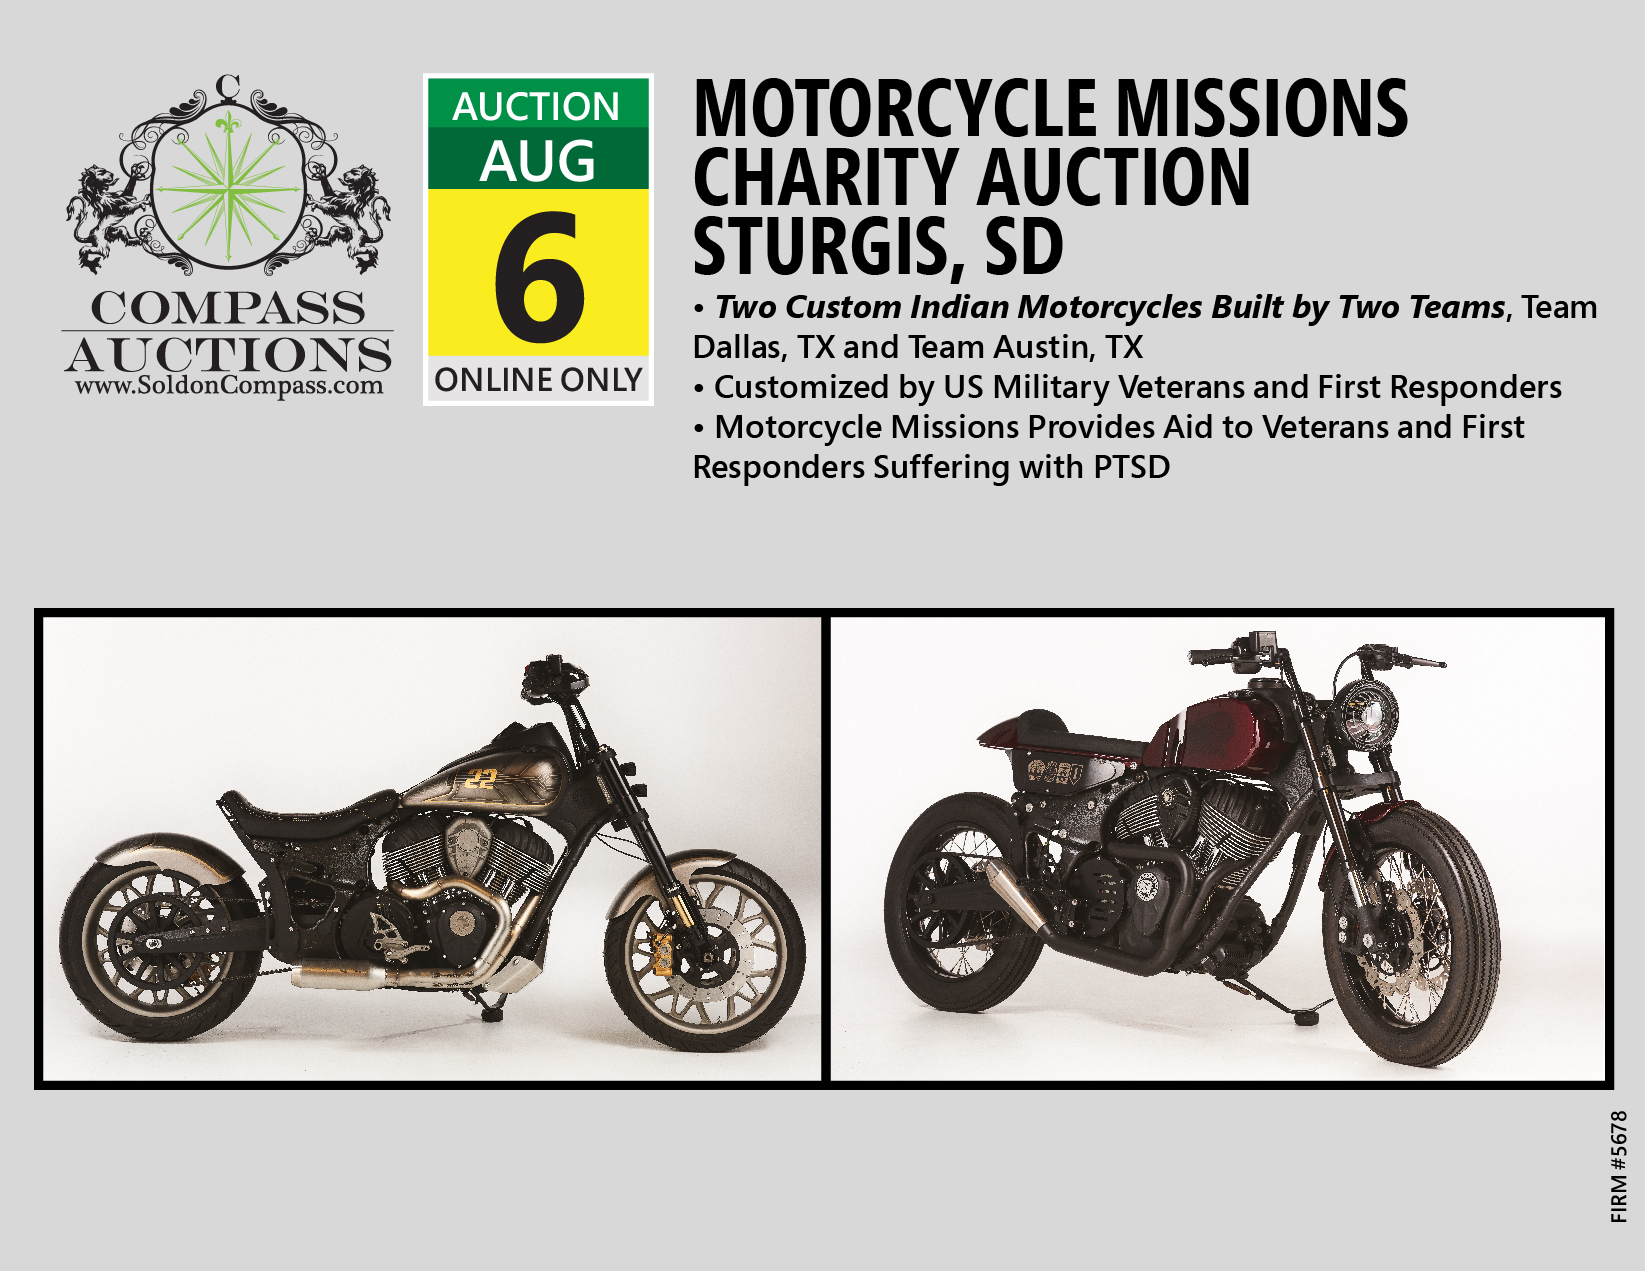 August 2019 Motorcycle Missions Auction Sturgis